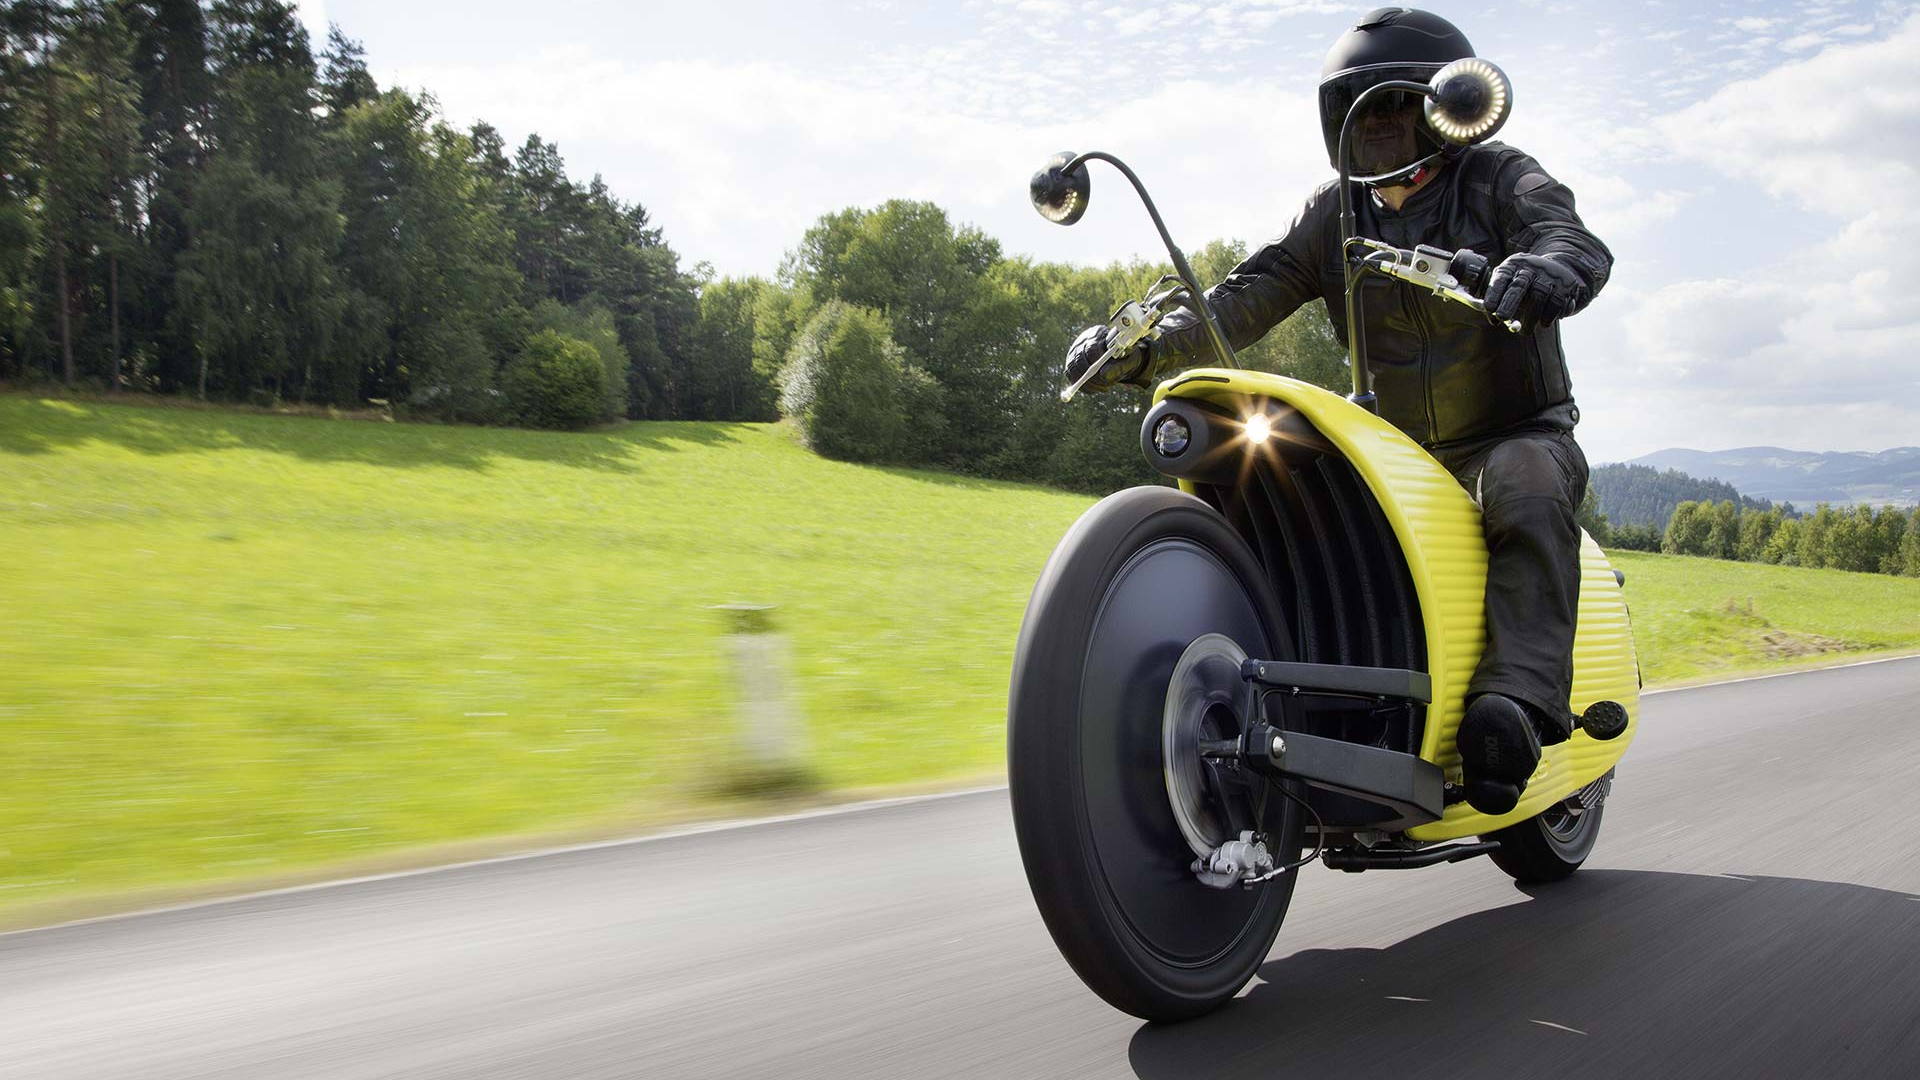 Johammer electric motorcycle